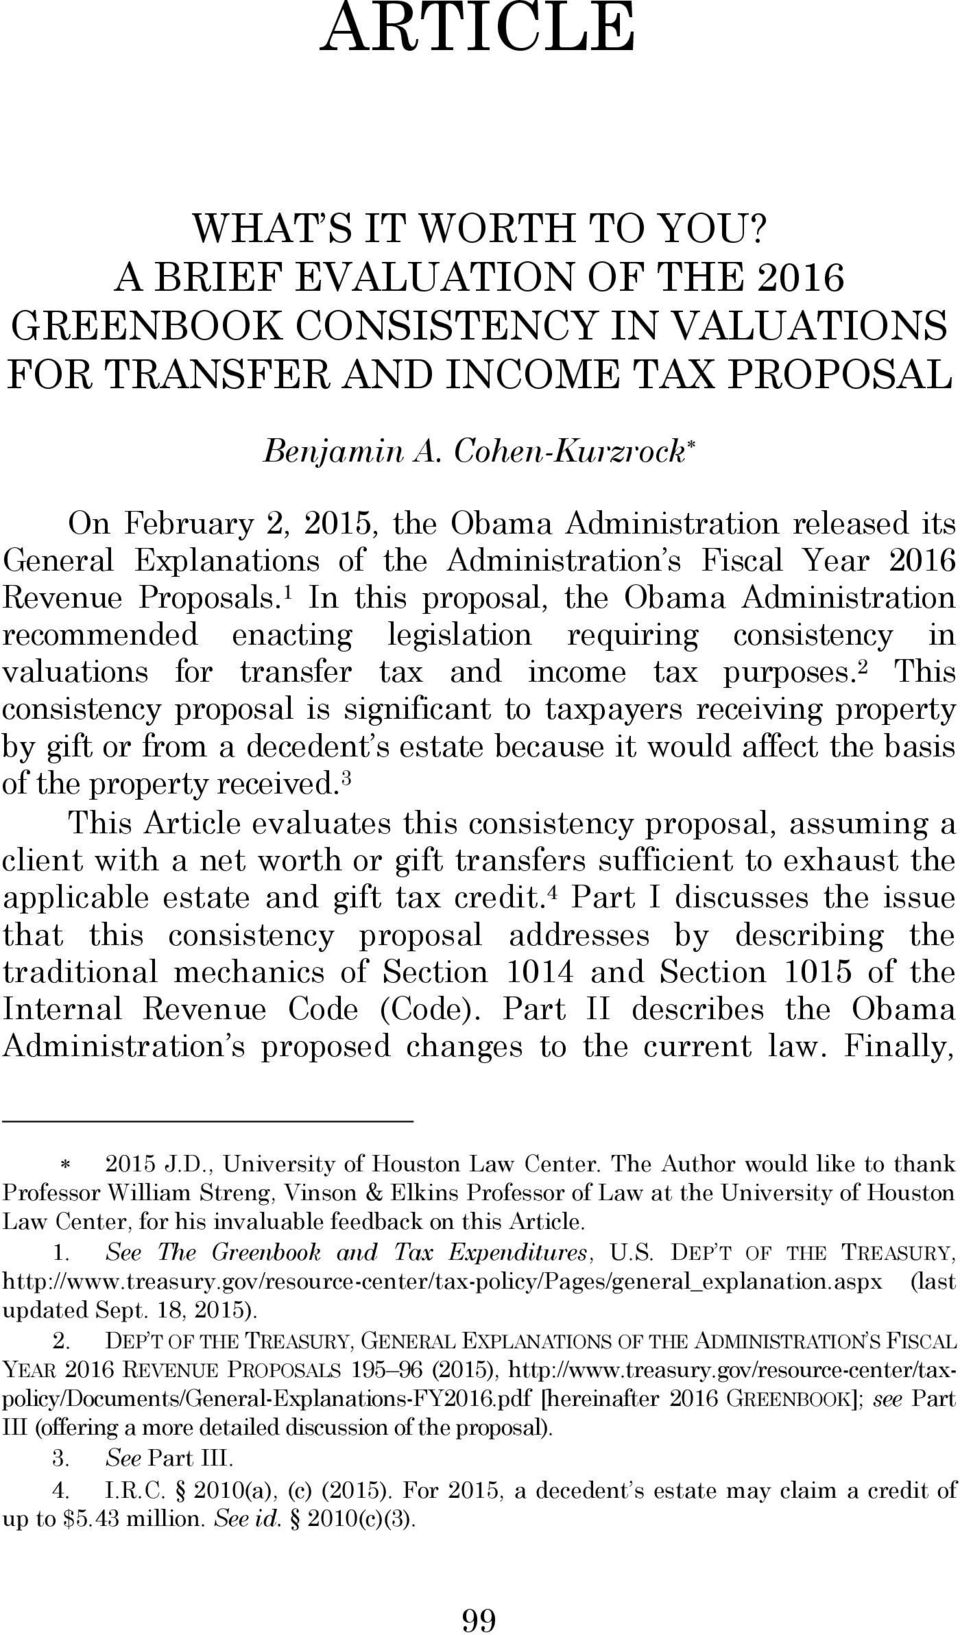 1 In this proposal, the Obama Administration recommended enacting legislation requiring consistency in valuations for transfer tax and income tax purposes.